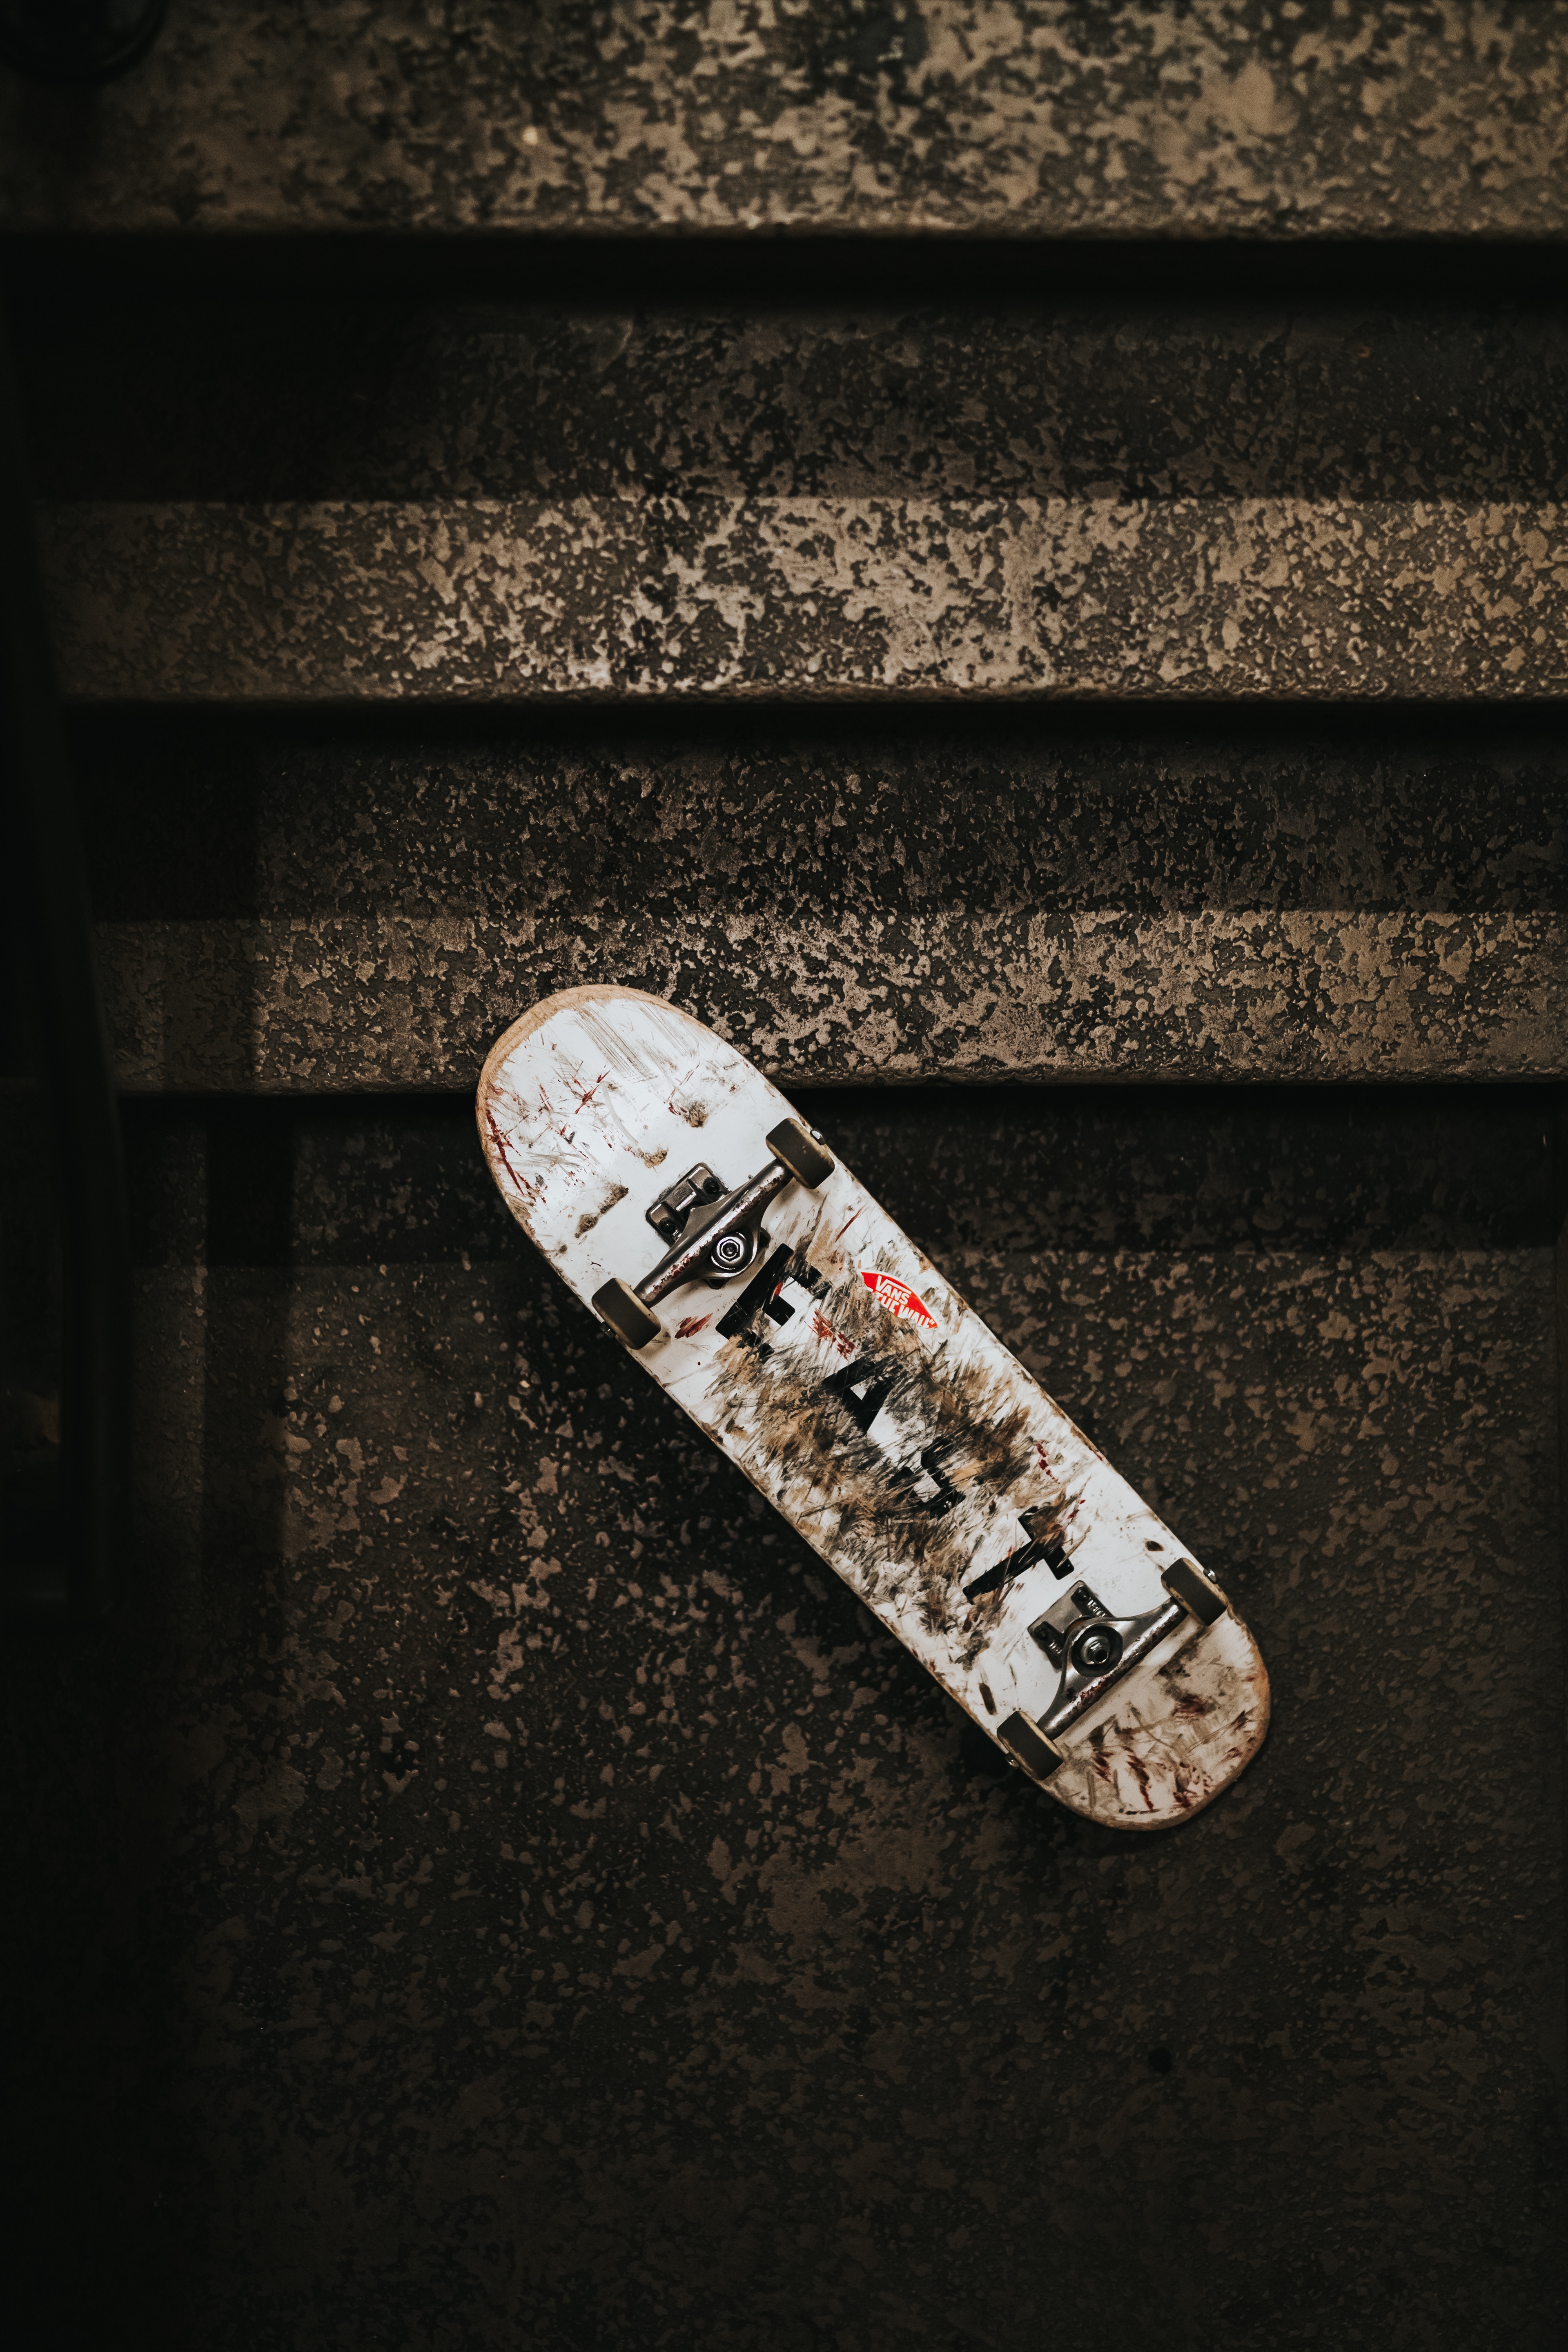 sports, lost, stairs, ladder, shabby, skateboard, wheels, dirty Aesthetic wallpaper